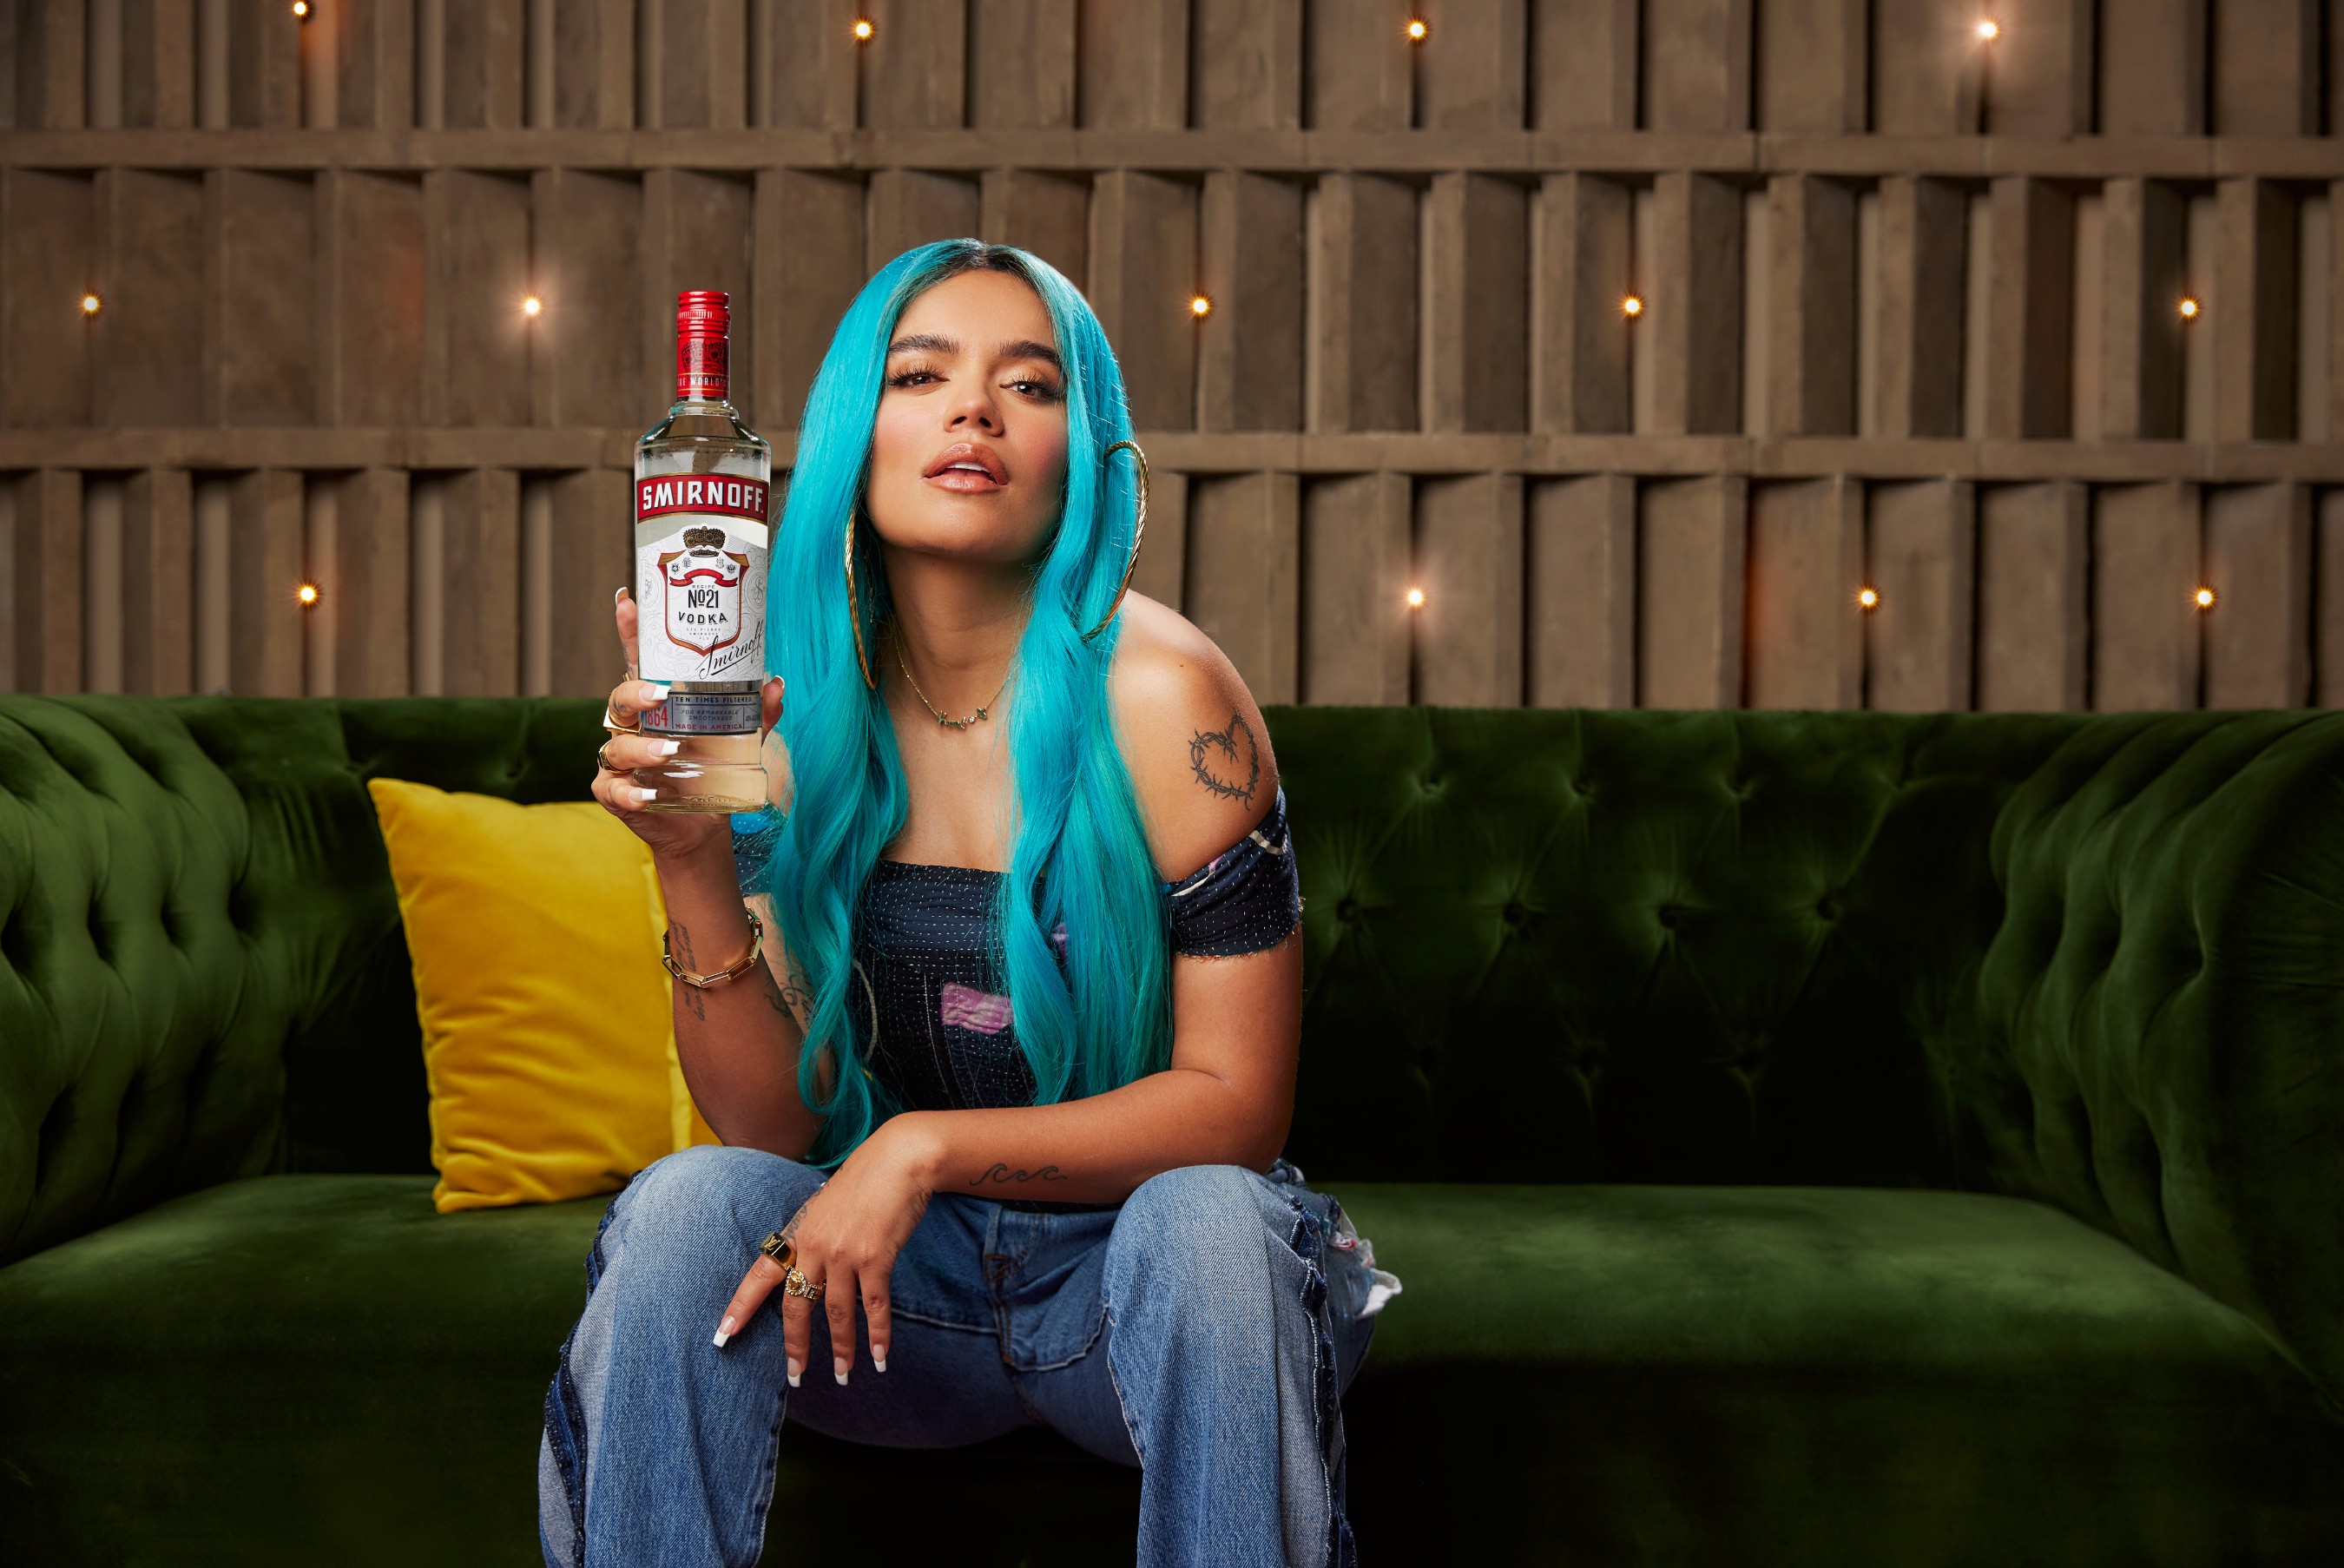 Smirnoff is announcing it is officially teaming up with Colombian singer, songwriter and business mogul Karol G to collaborate on new projects that showcase the power of Latin culture, as well as support the brand in its longstanding commitment to diversity and inclusion efforts.